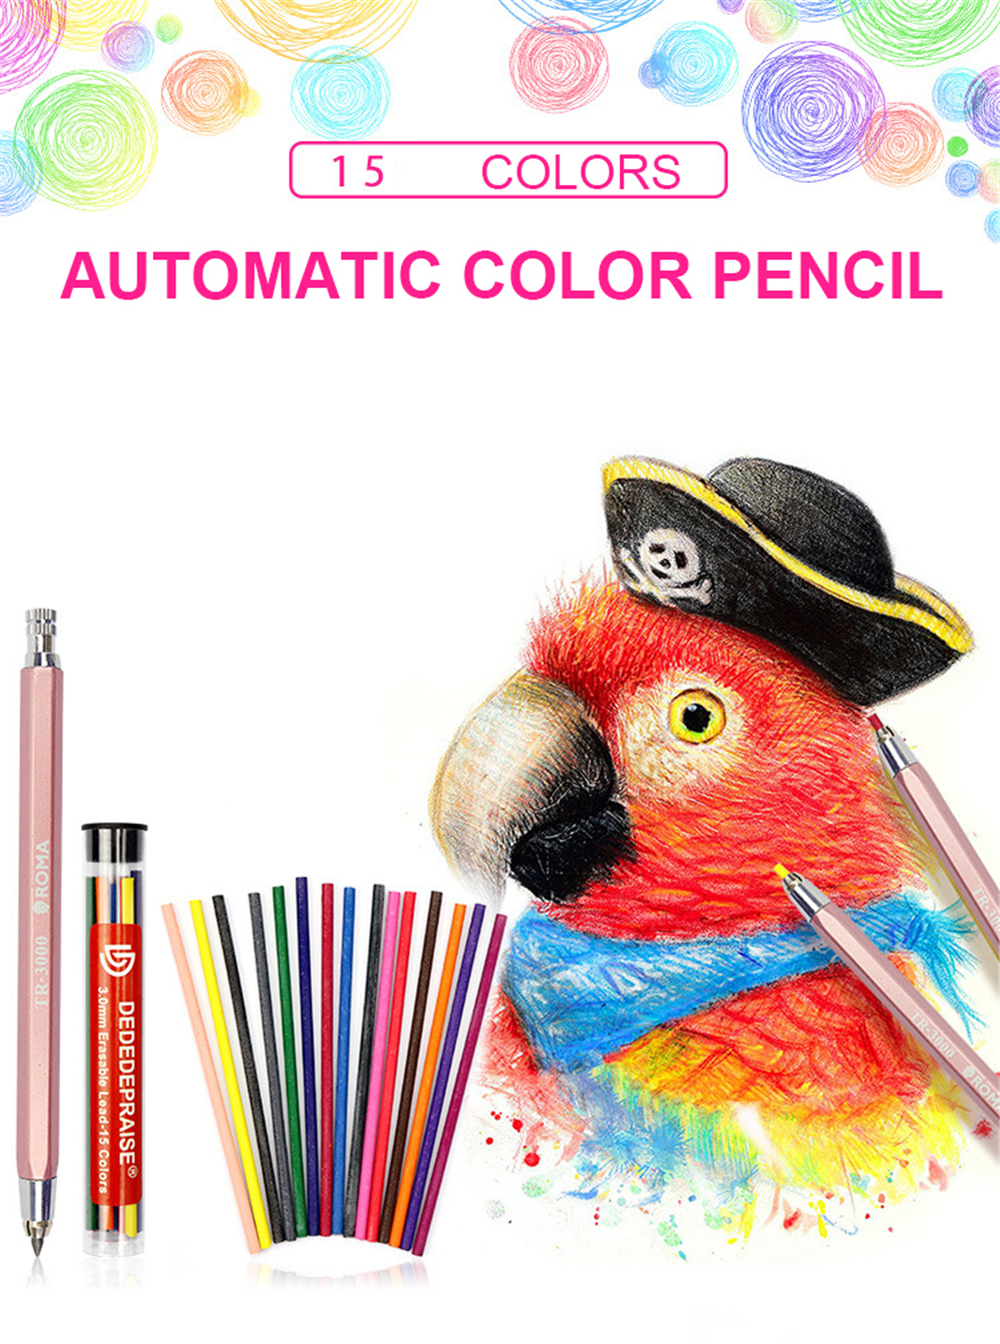 30-MM-Automatic-Pencil-Erasable-Color-Lead-With-Portable-Refill-Sharpener-Art-Drawing-Design-Mechani-1738429-1